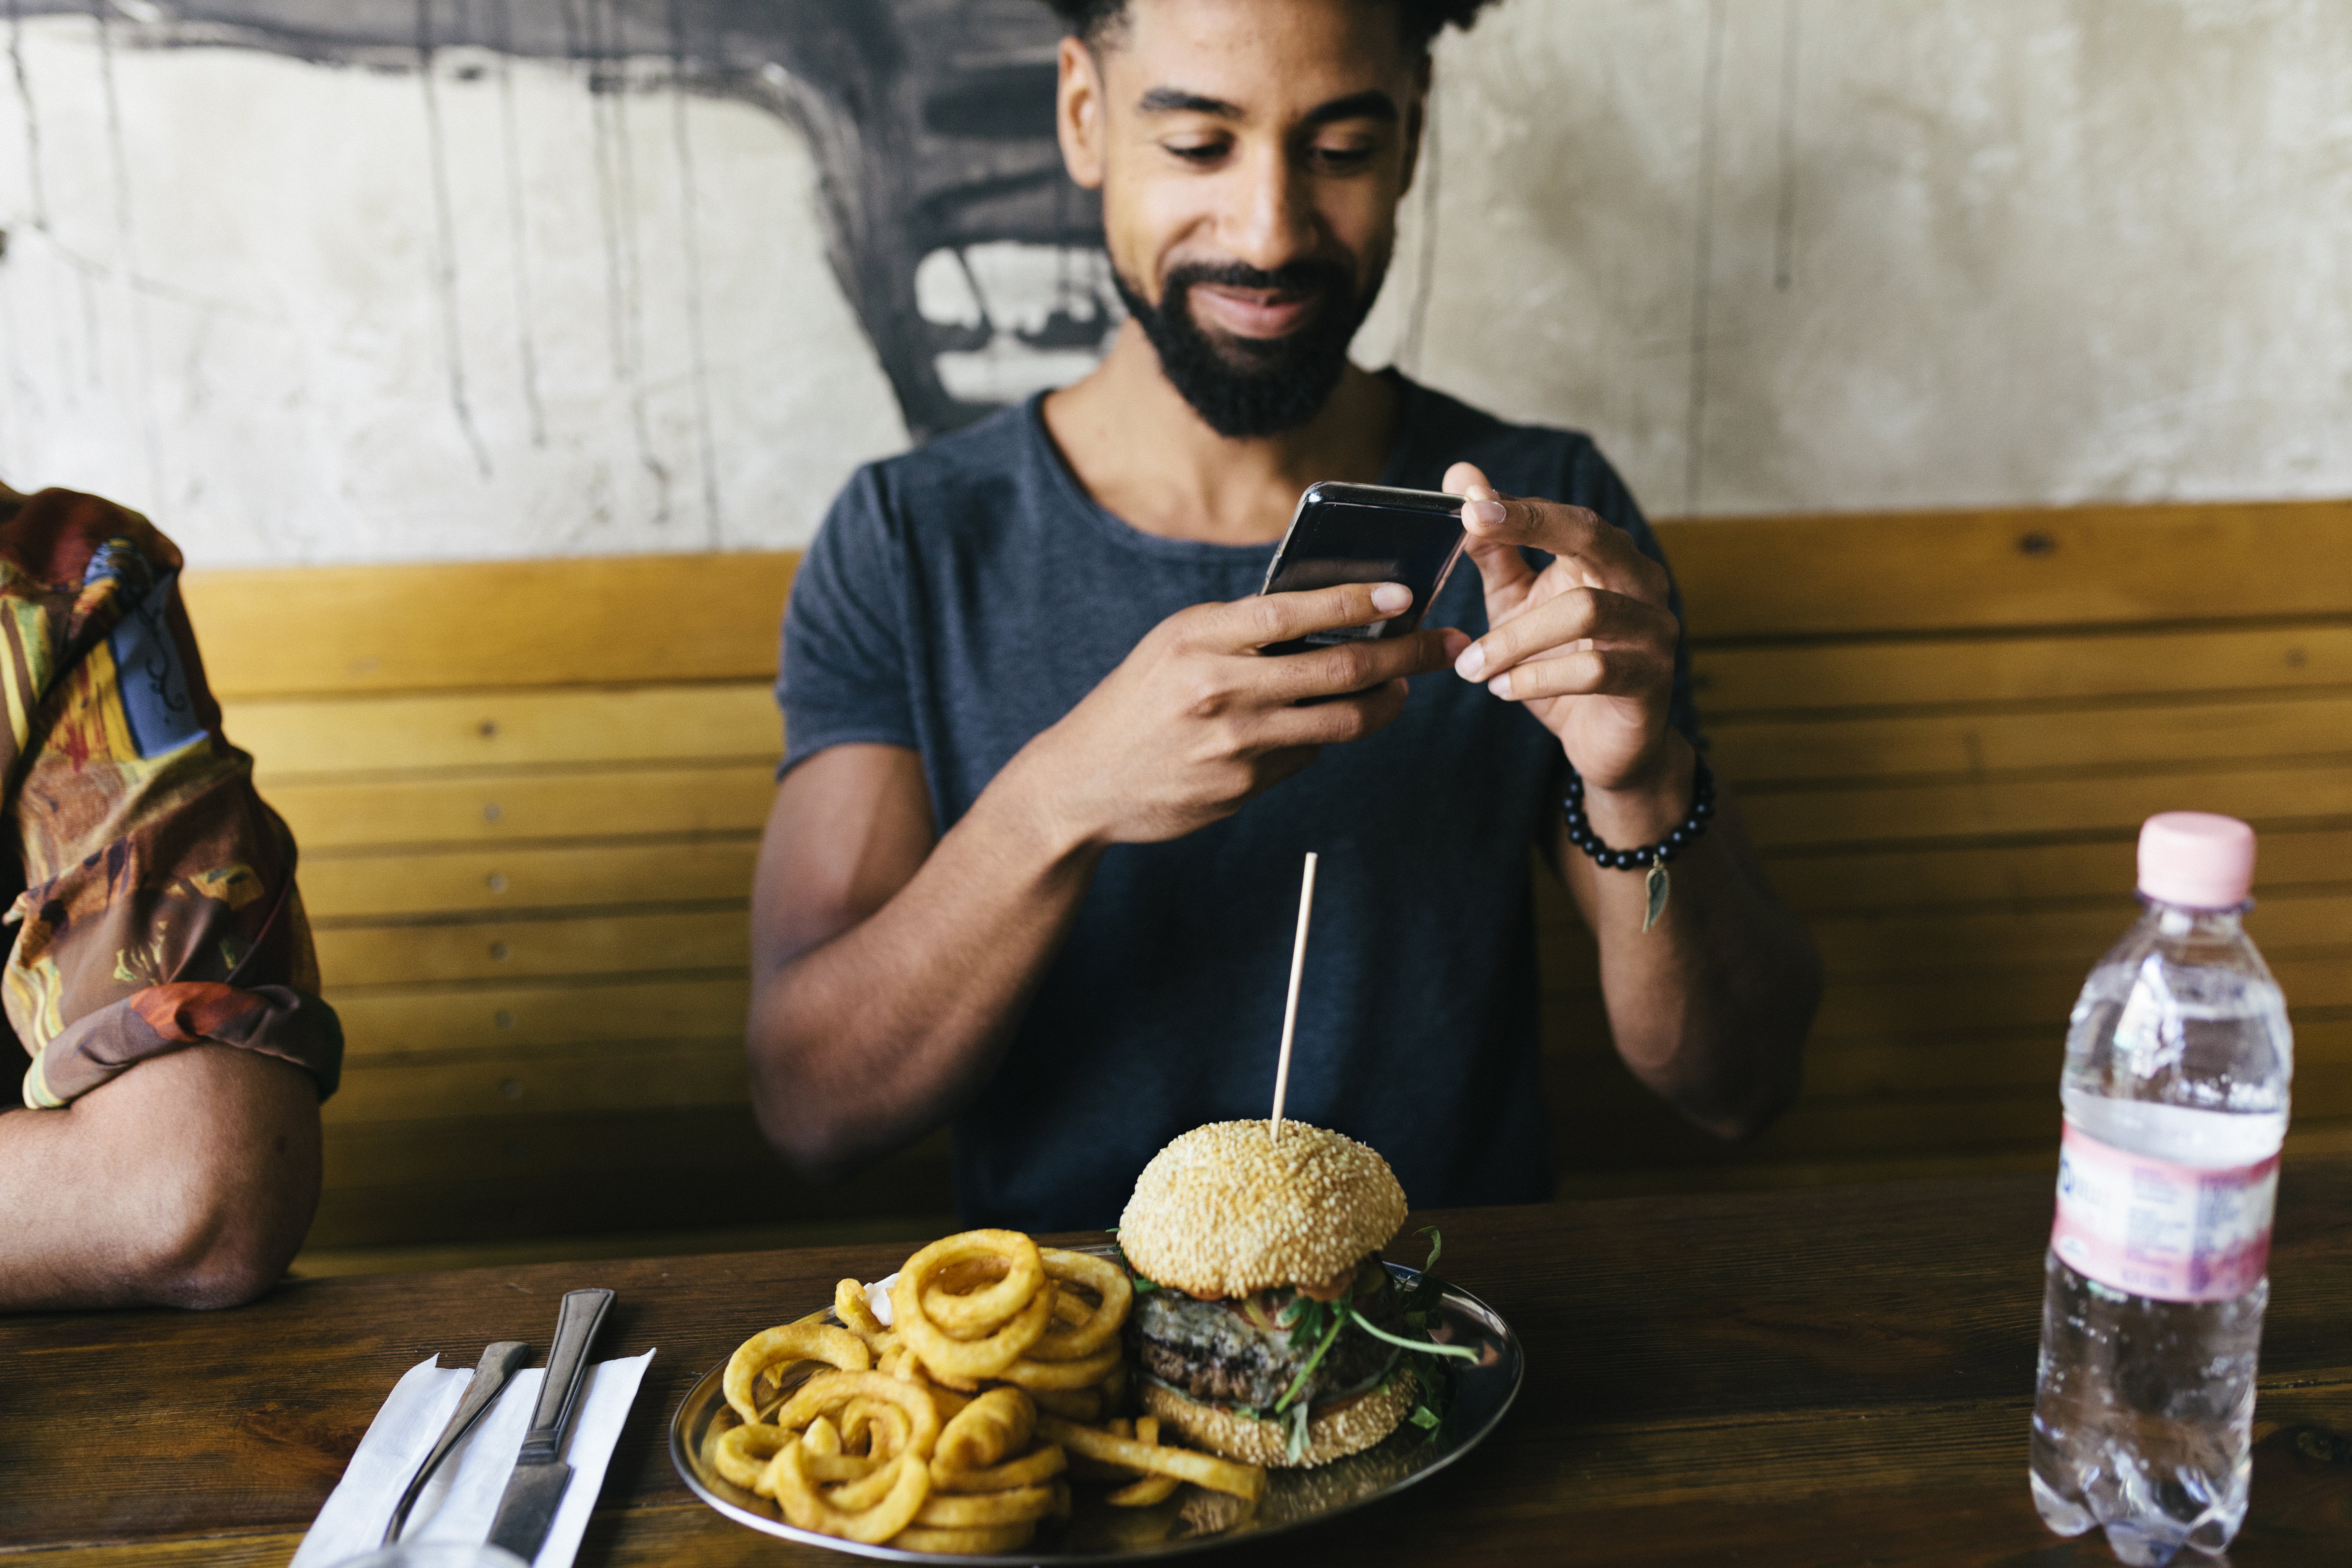 A man using his smartphone, taking photos of his burger before eating it at a trendy restaurant. | Photo: Getty Images